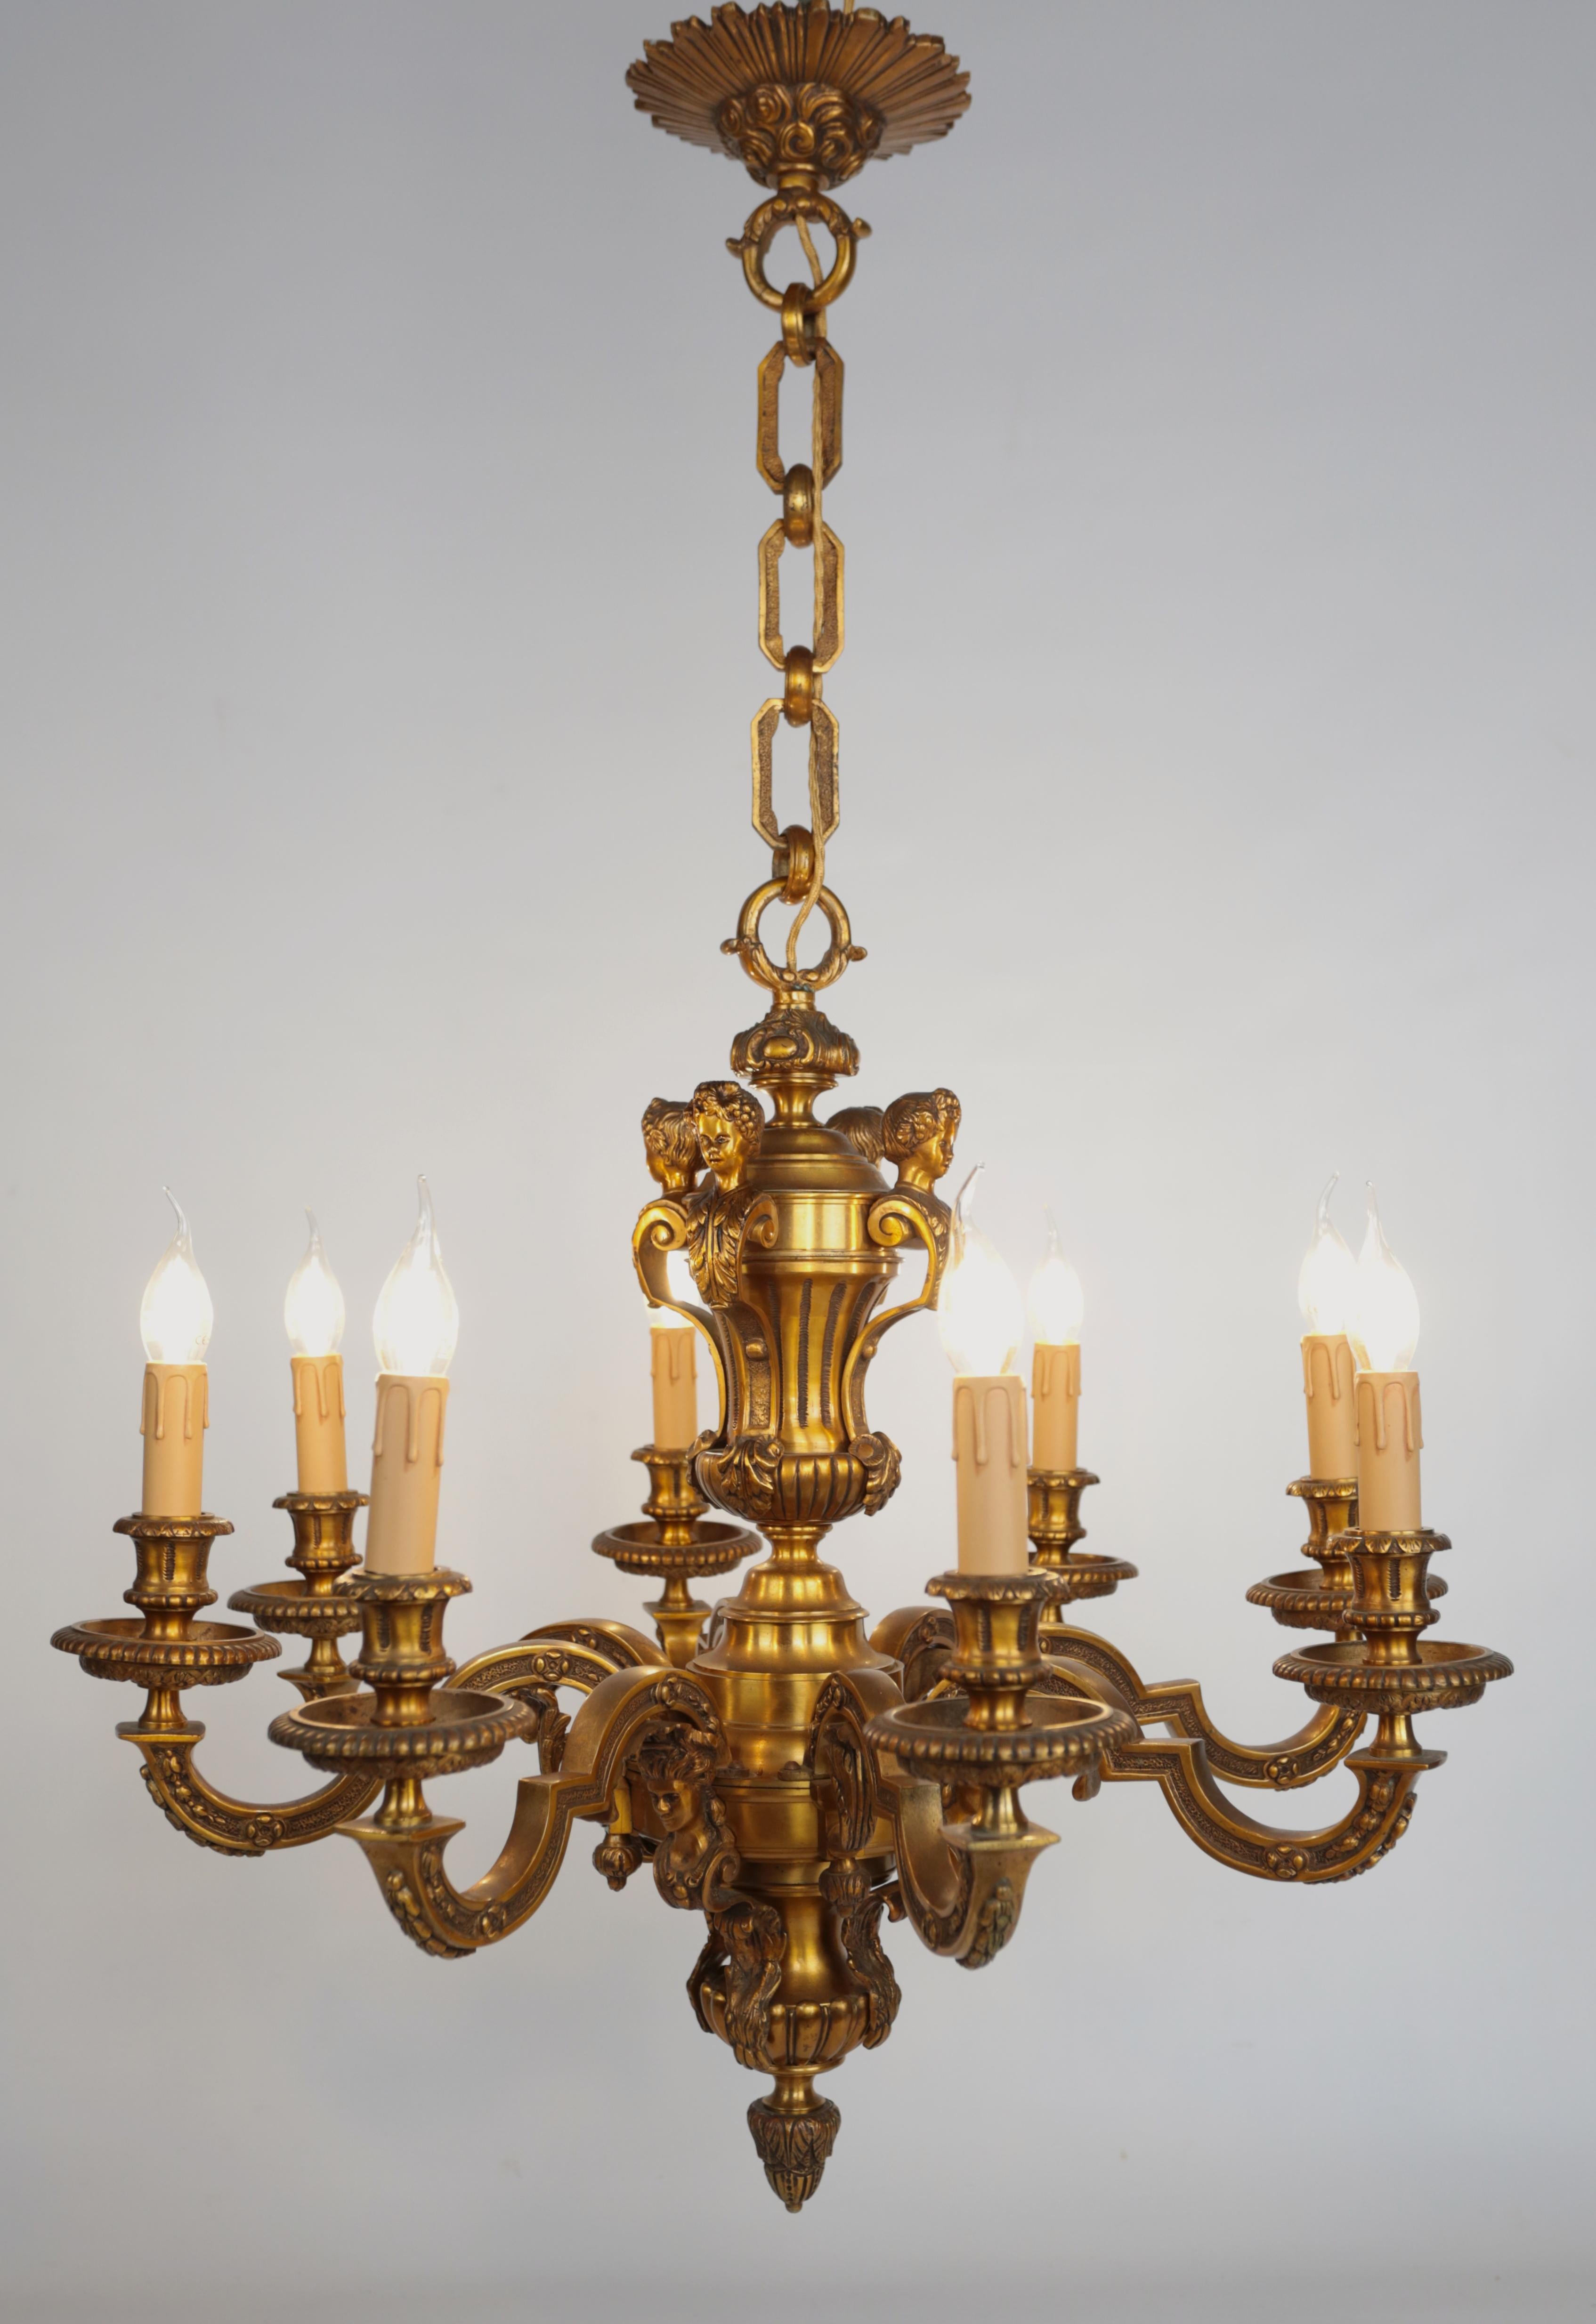 Antique French Mazarin Bronze Chandelier

A heavy eight-armed bronze chandelier in the style of Louis XIV. The upper part decorated with cherub heads on an acanthus leaf and the lower part with caryatid heads. Elaborated in detail. The chandelier